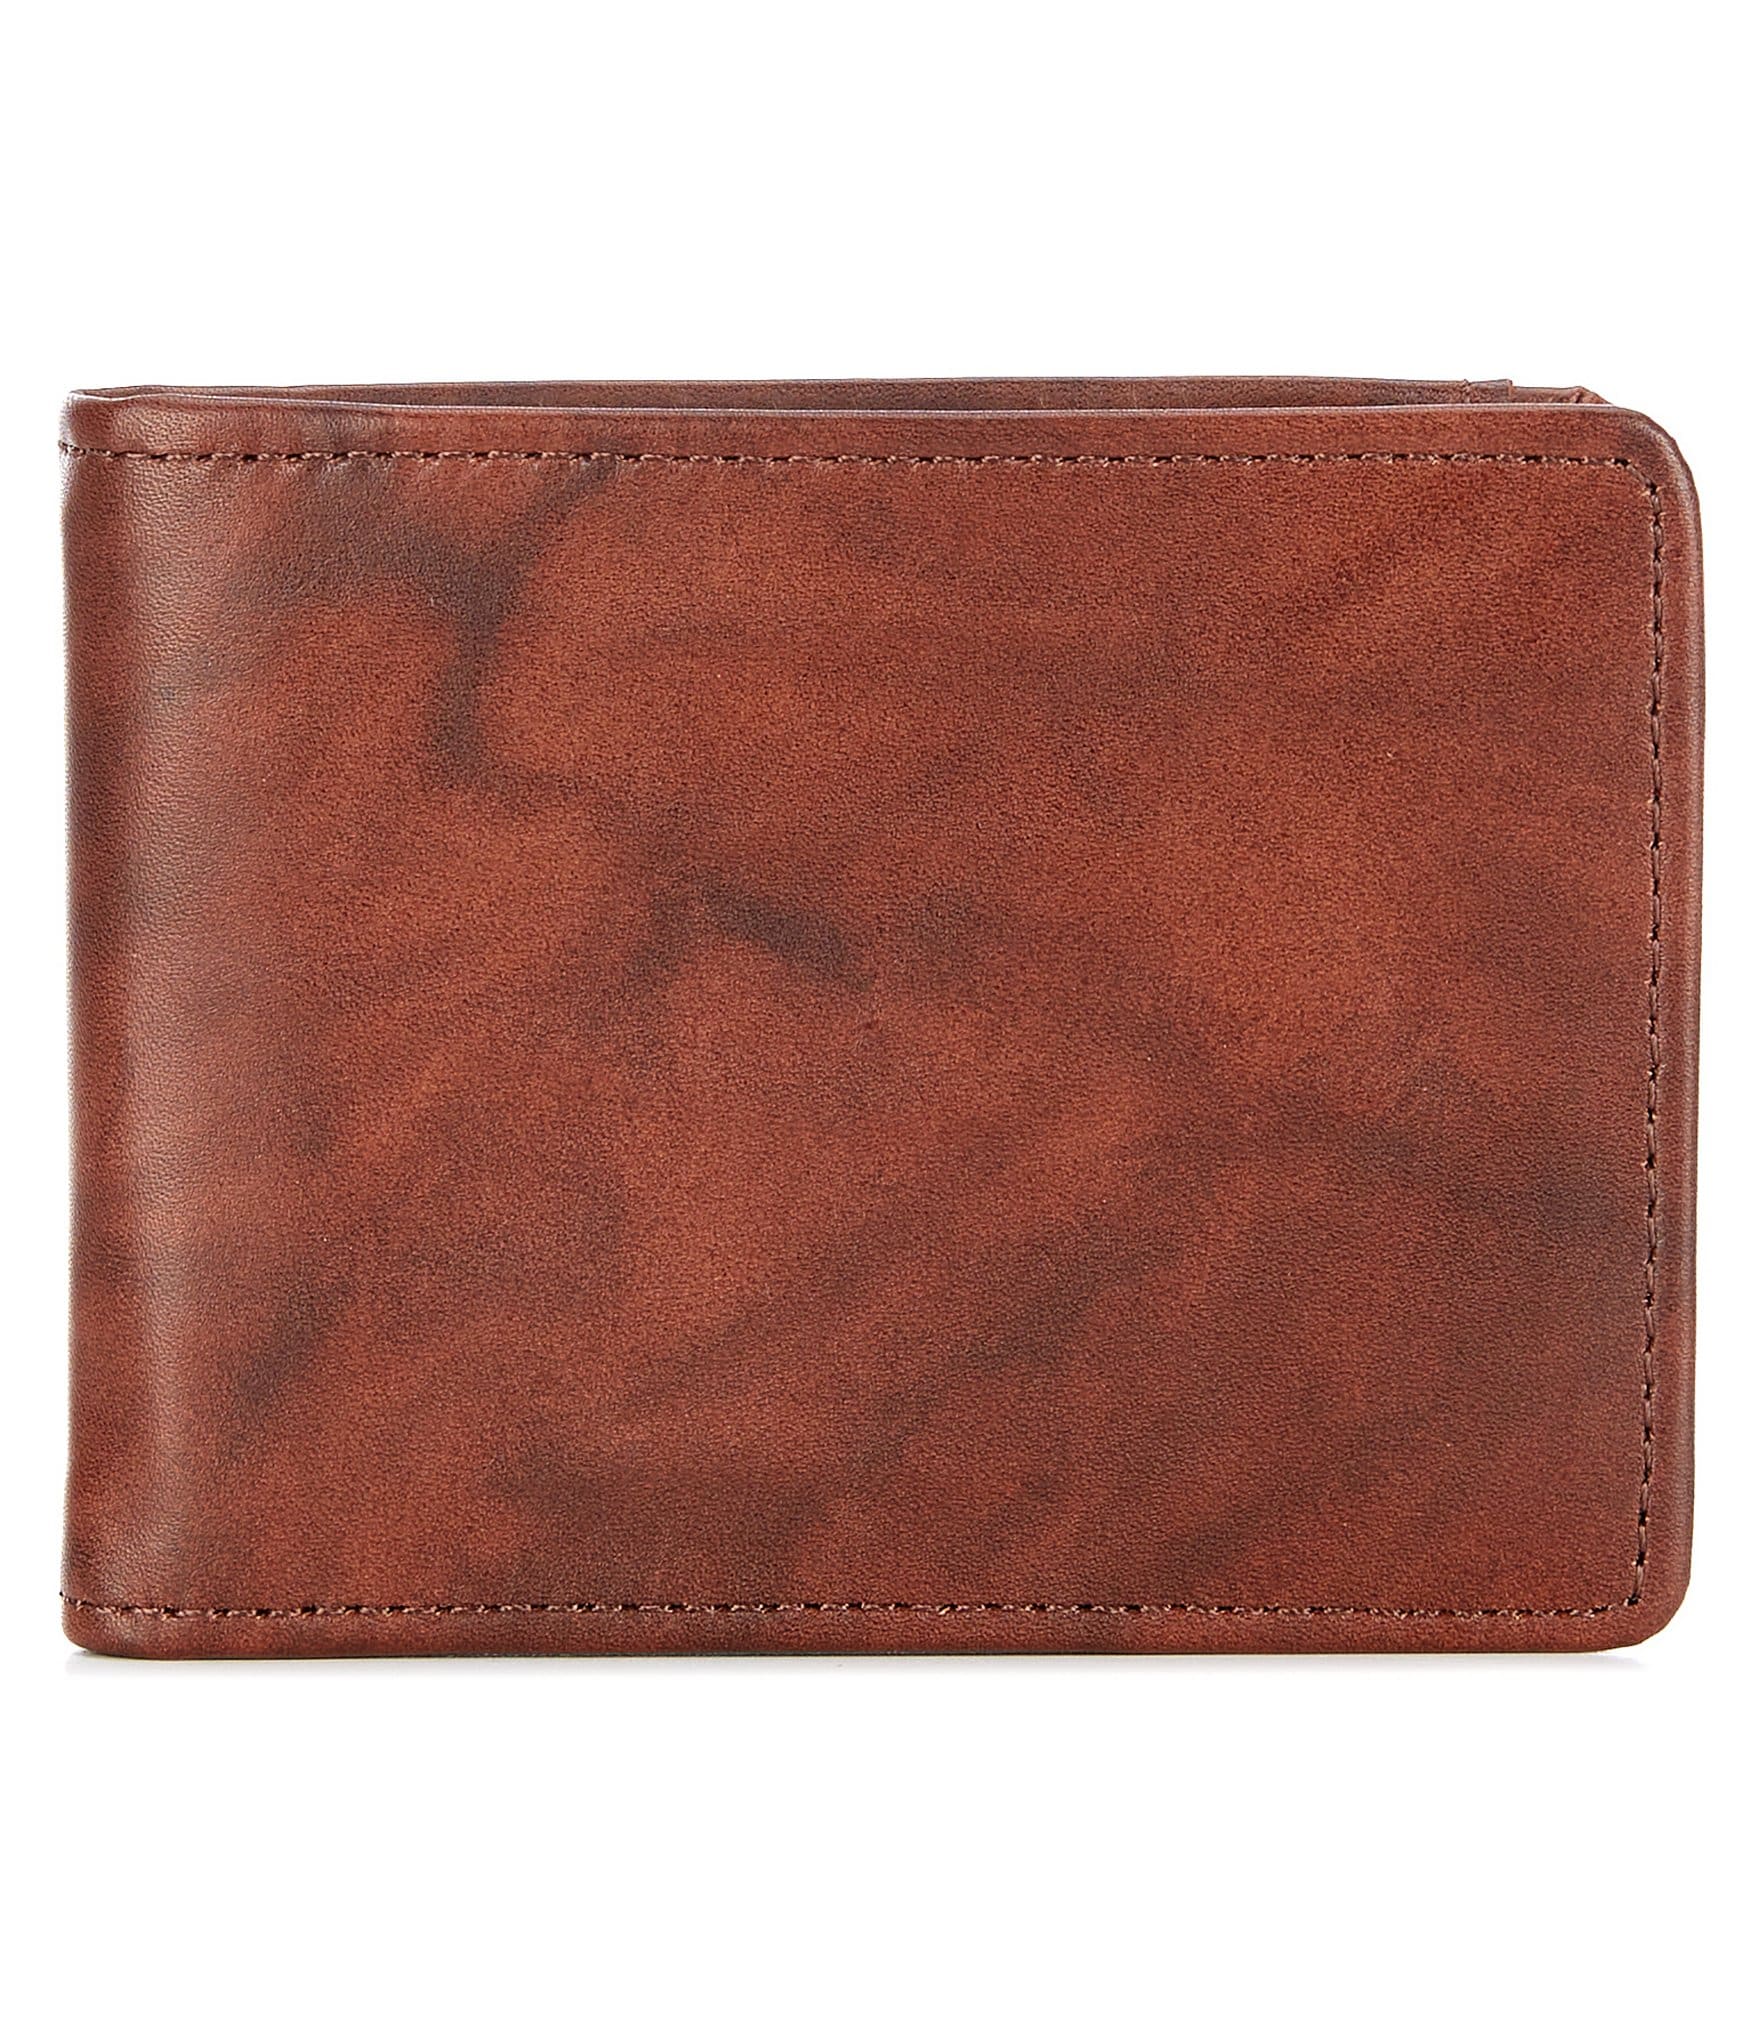 Roundtree & Yorke Front Pocket Flip Clip Leather Wallet